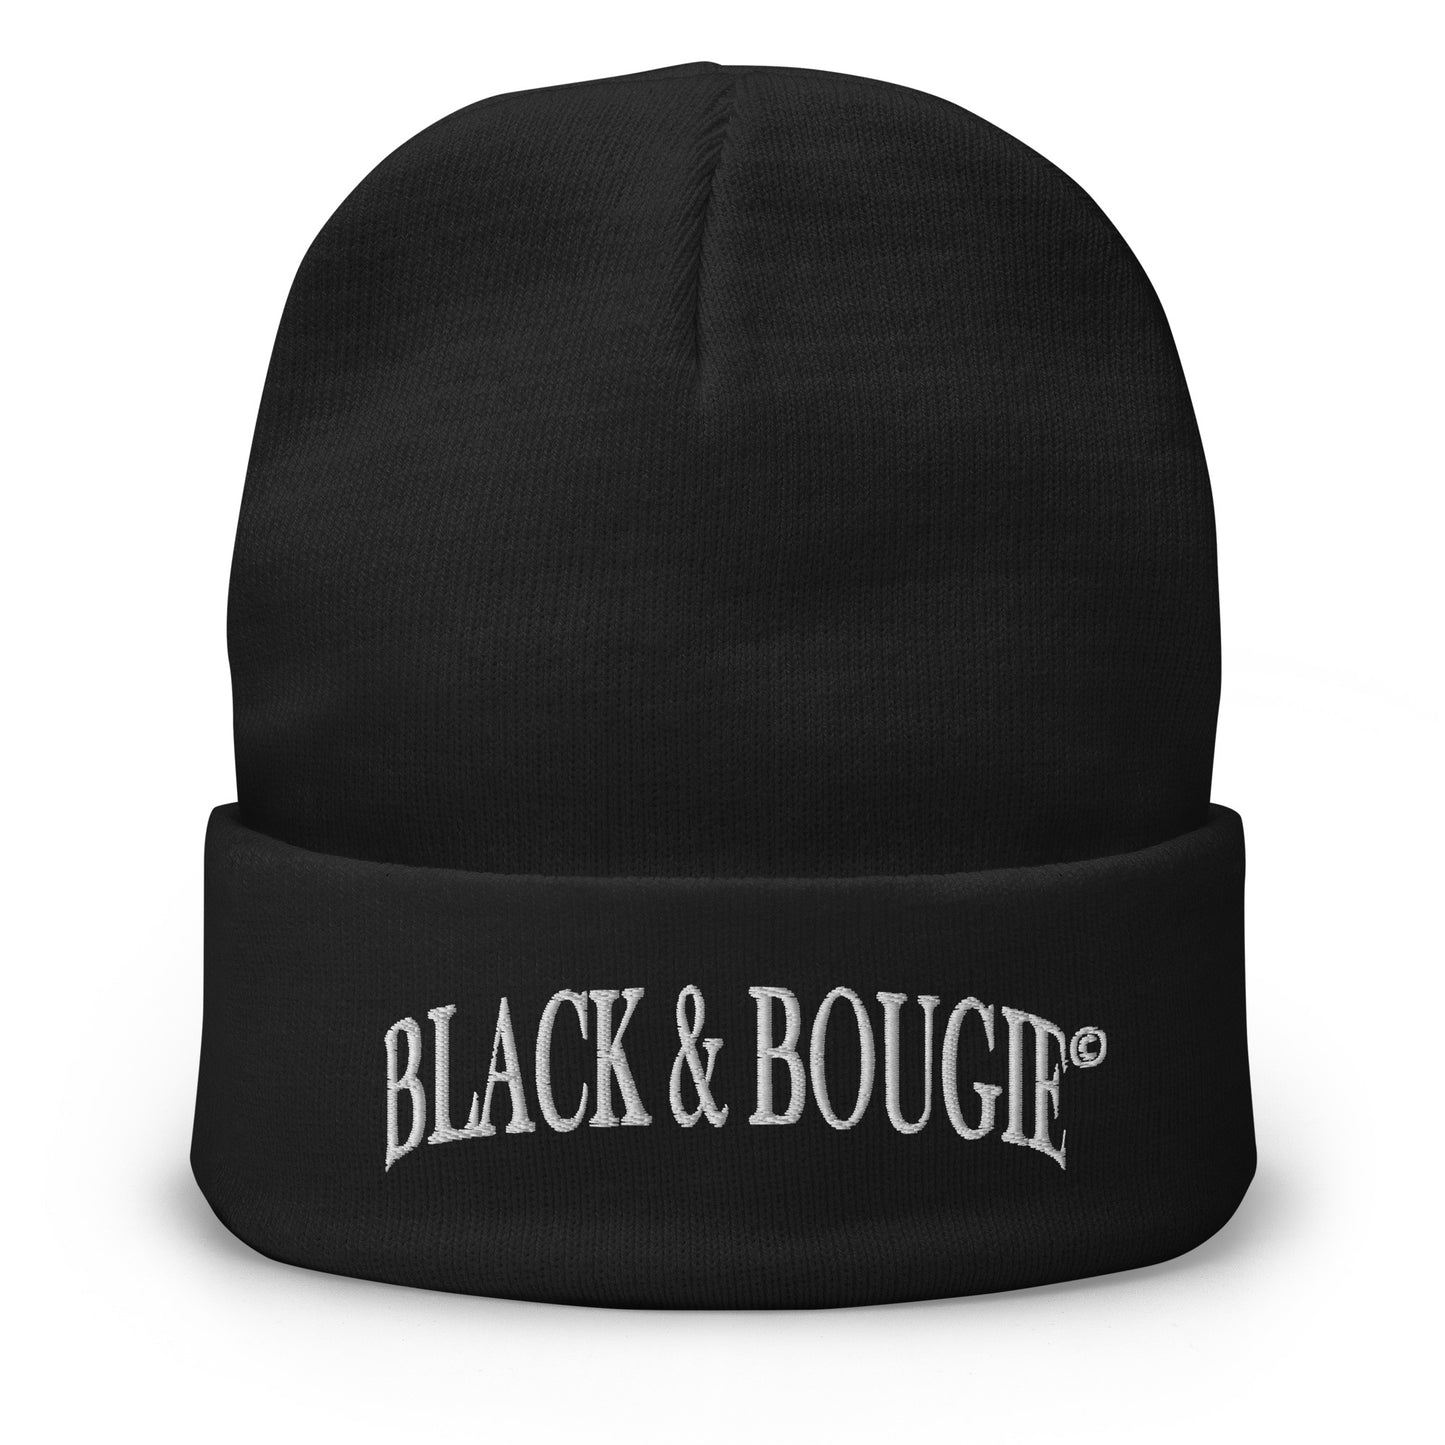 Black & Bougie - Embroidered Beanie